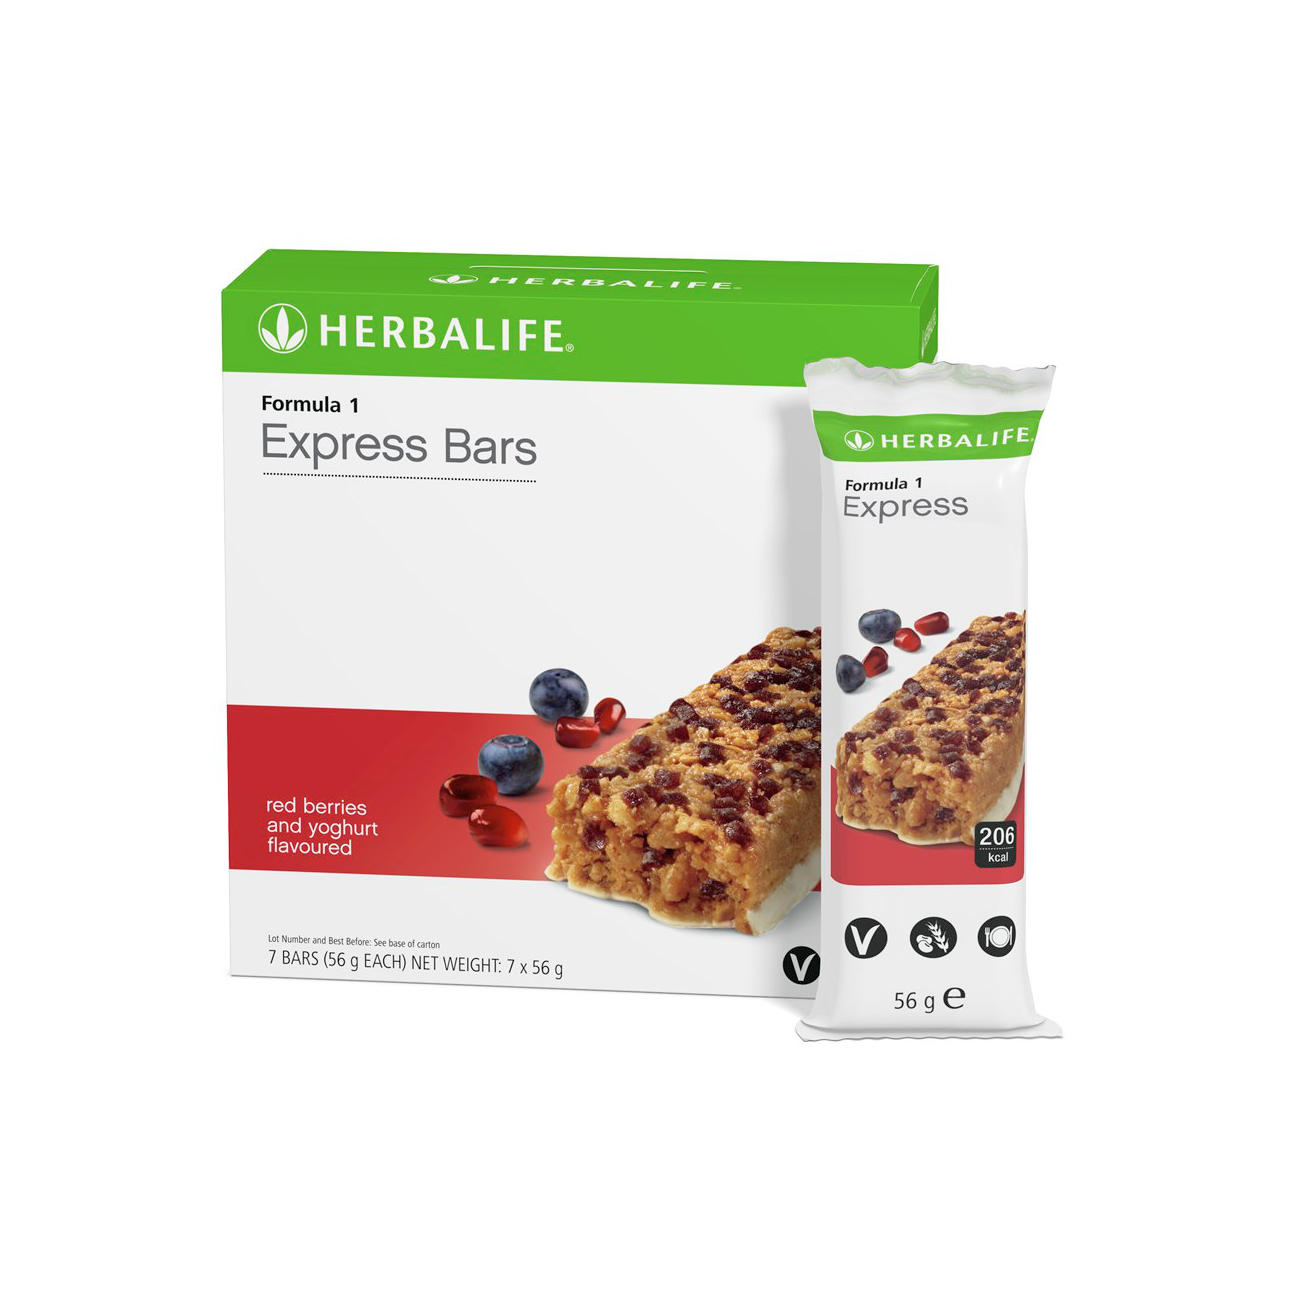 Formula 1 Express Bars  Red Berries and Yoghurt Flavoured product shot